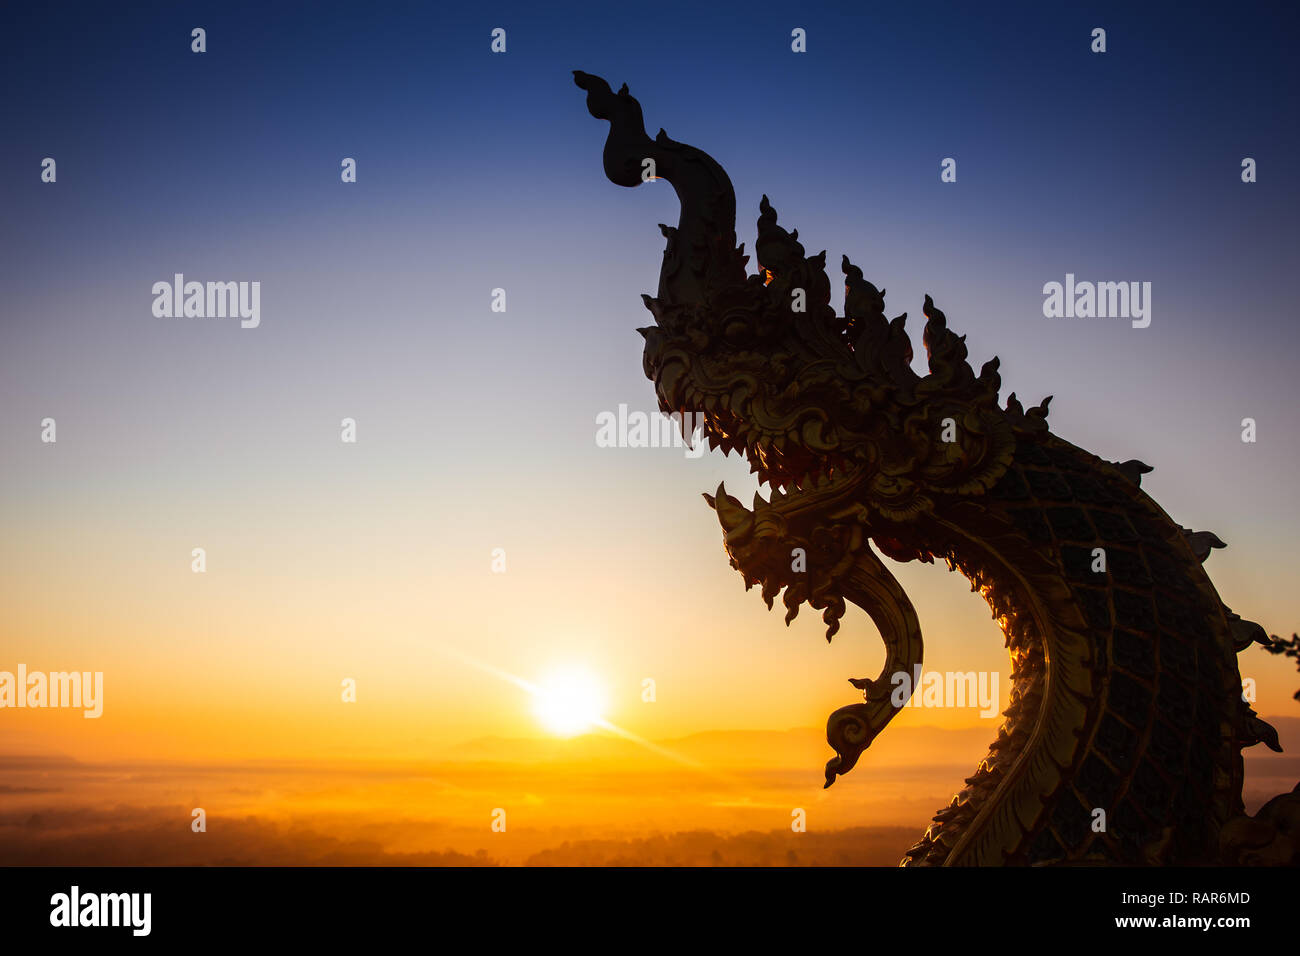 Naga statue or King of nagas Serpent animal in Buddhist legend. Stock Photo